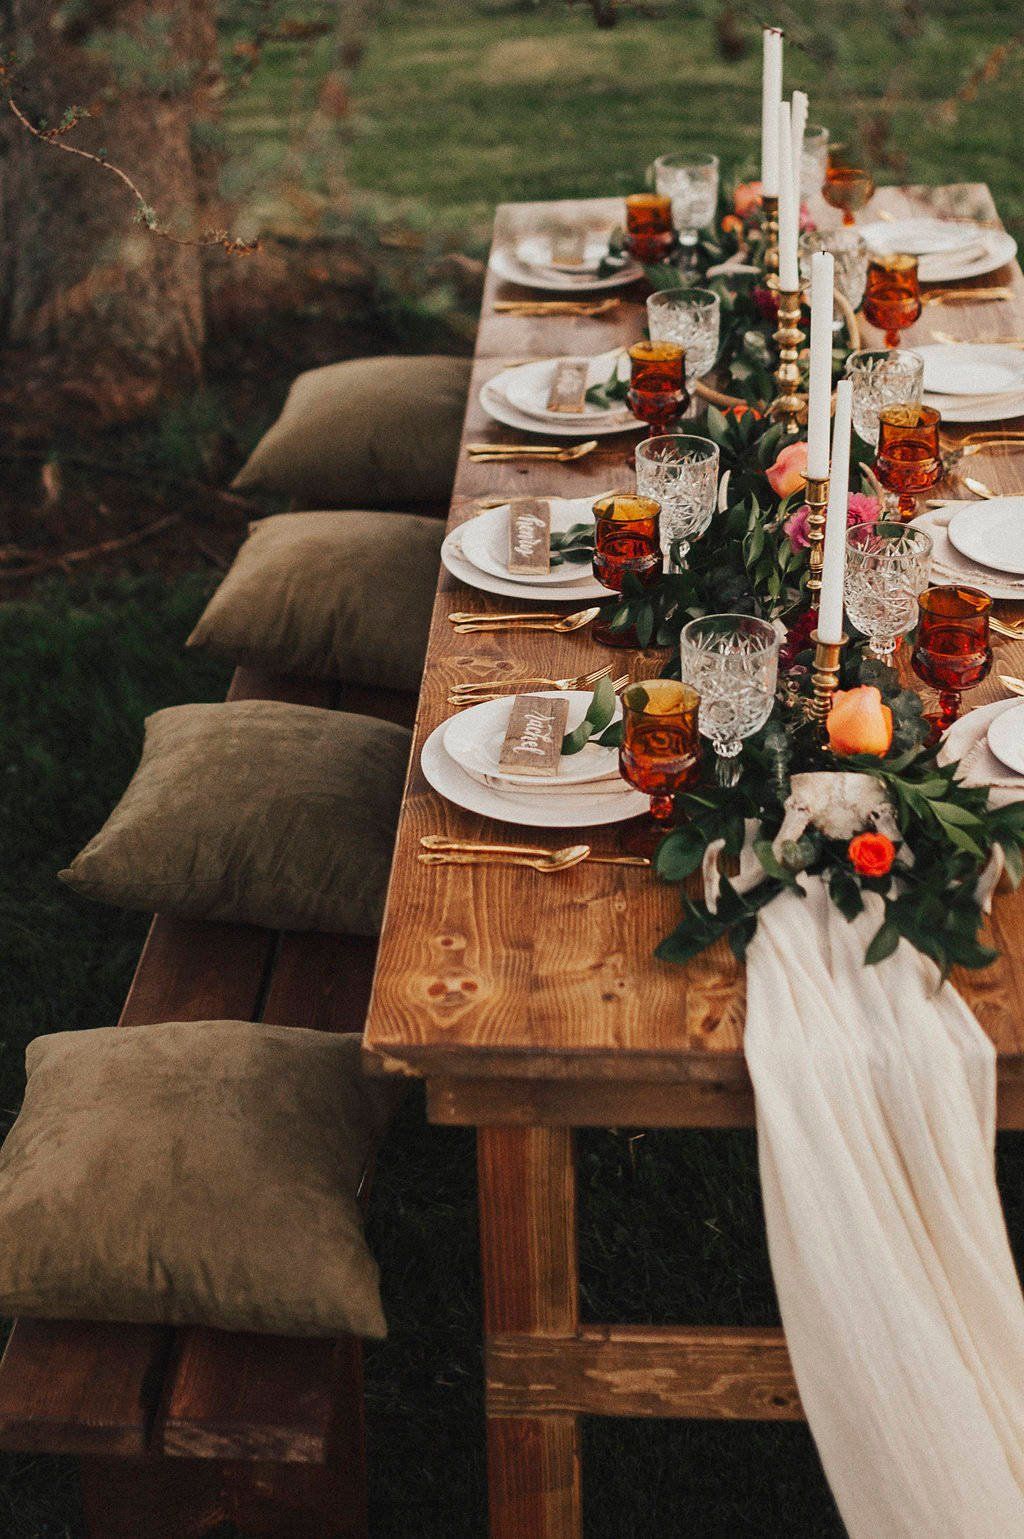 So many beautiful details in this fall tablescape.